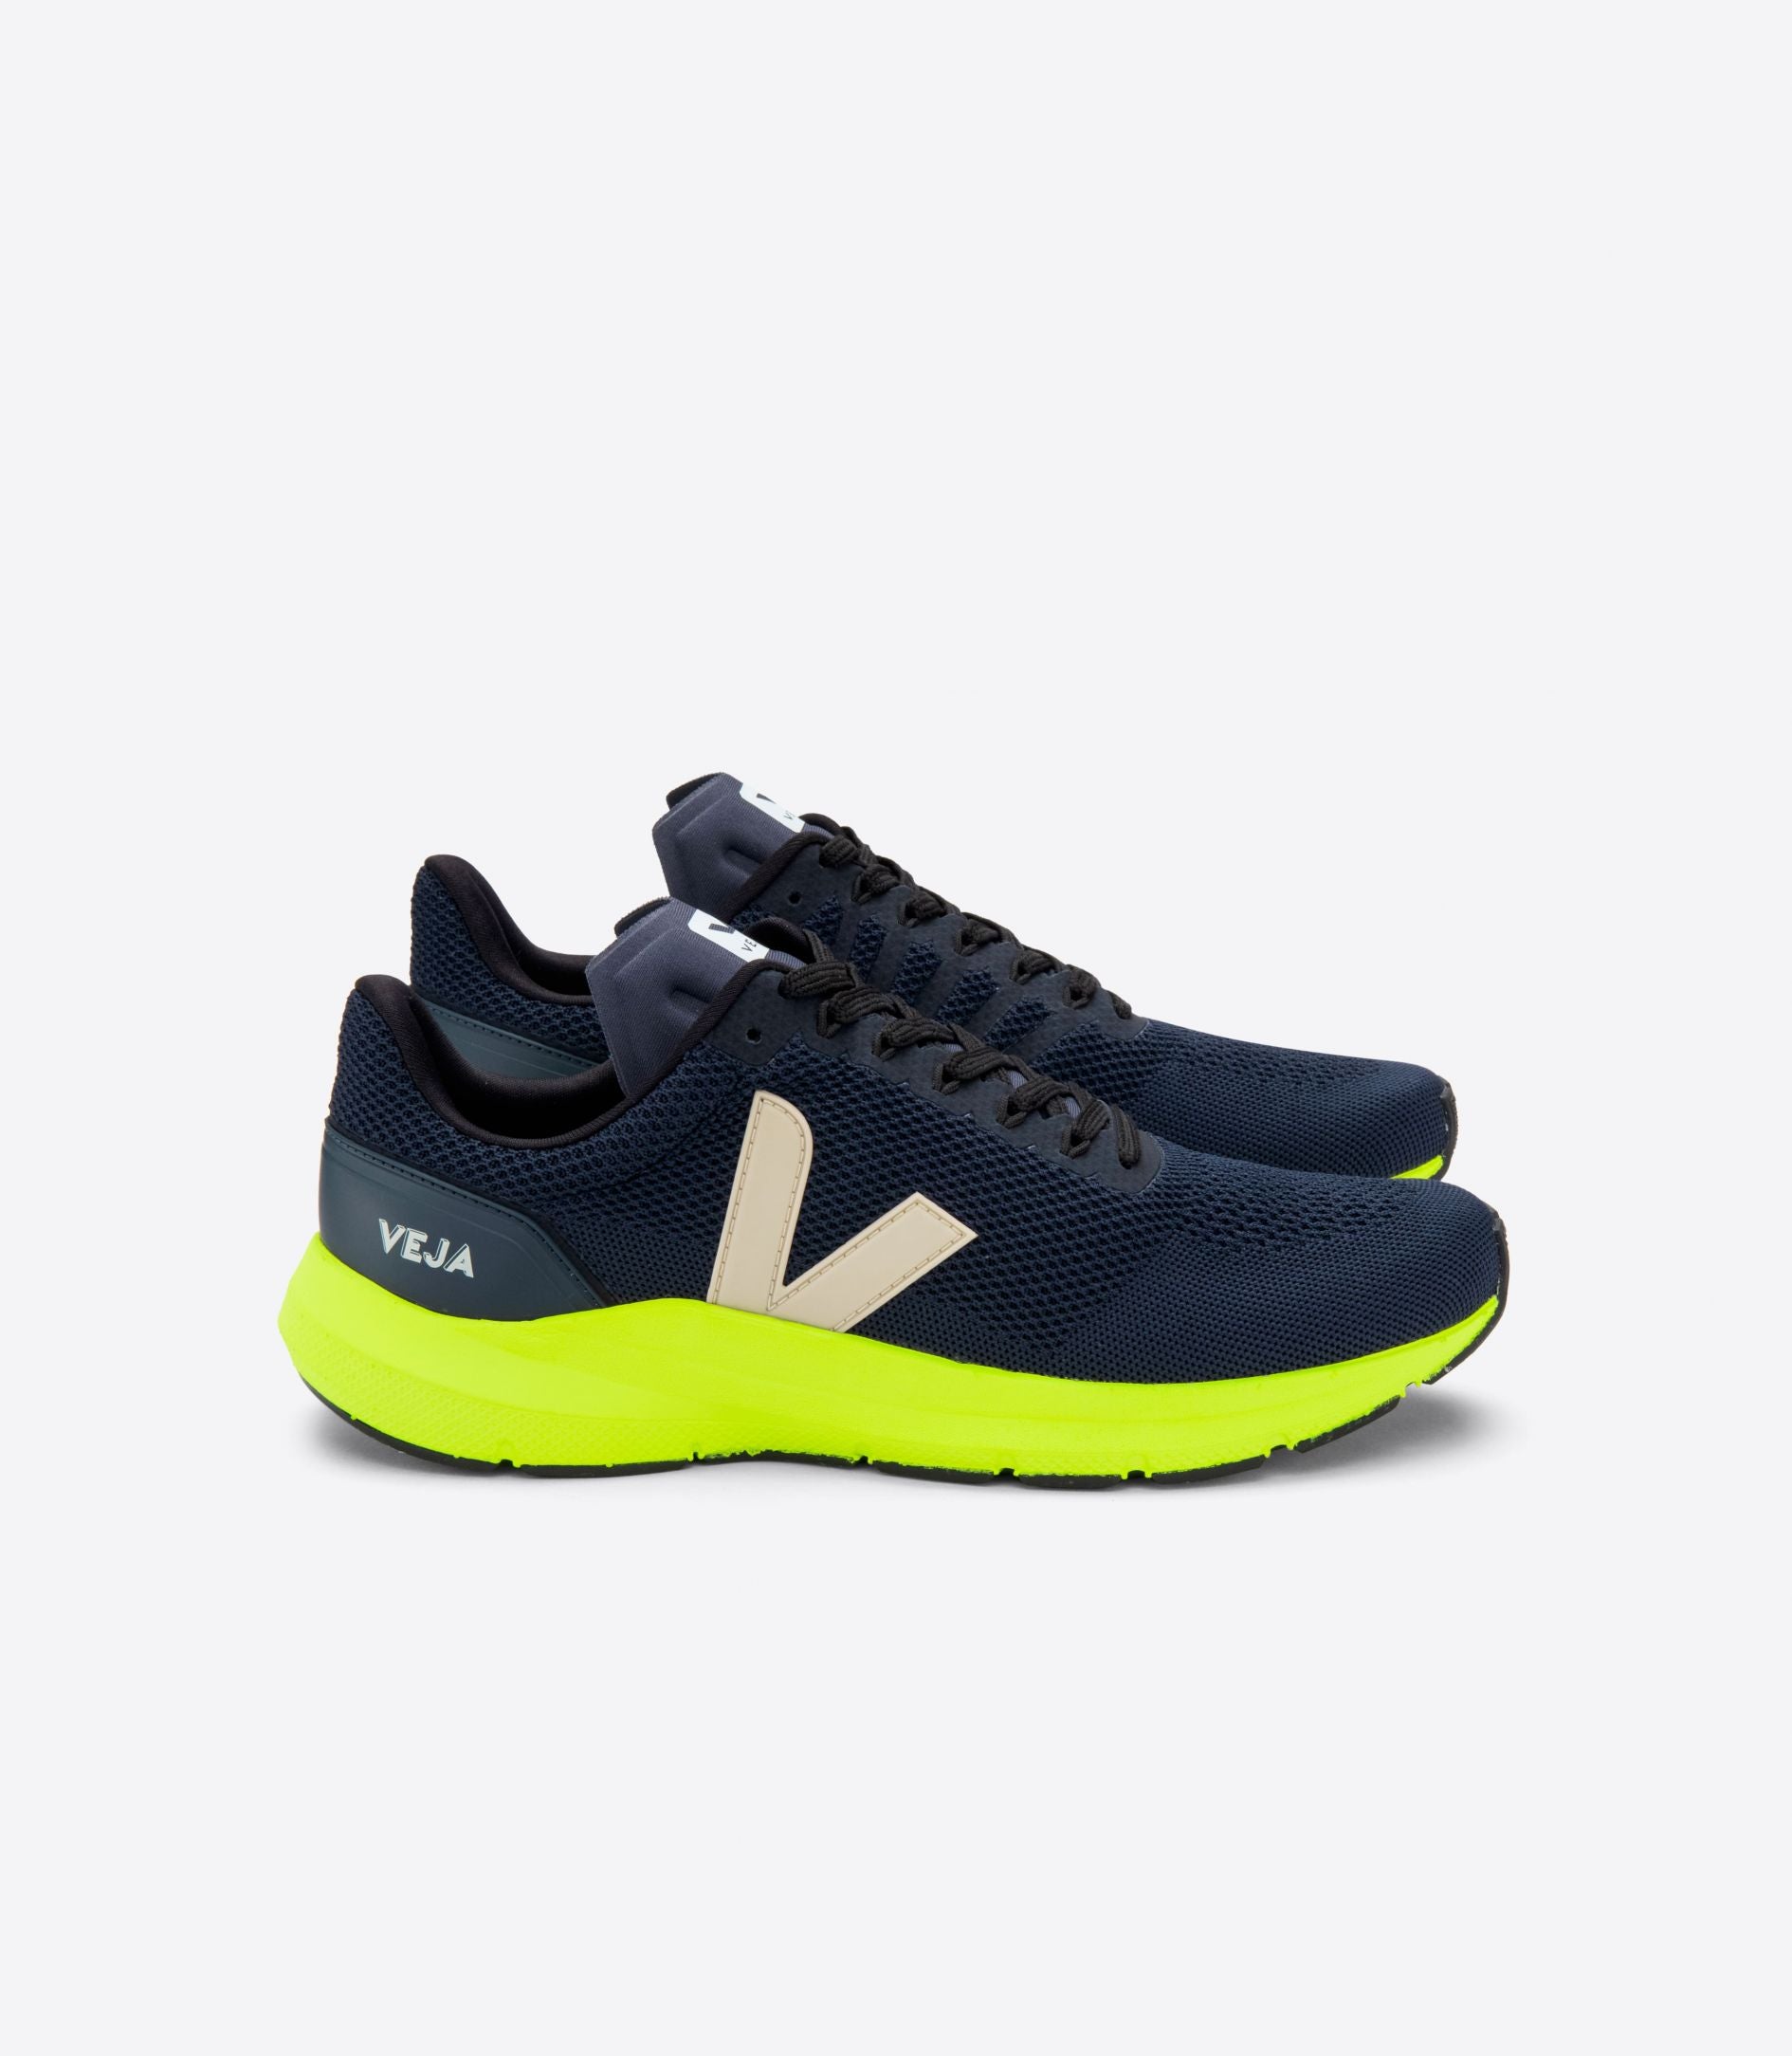 Latera view of the Men's Marlin by VEJA in the color Atomo / Pierre